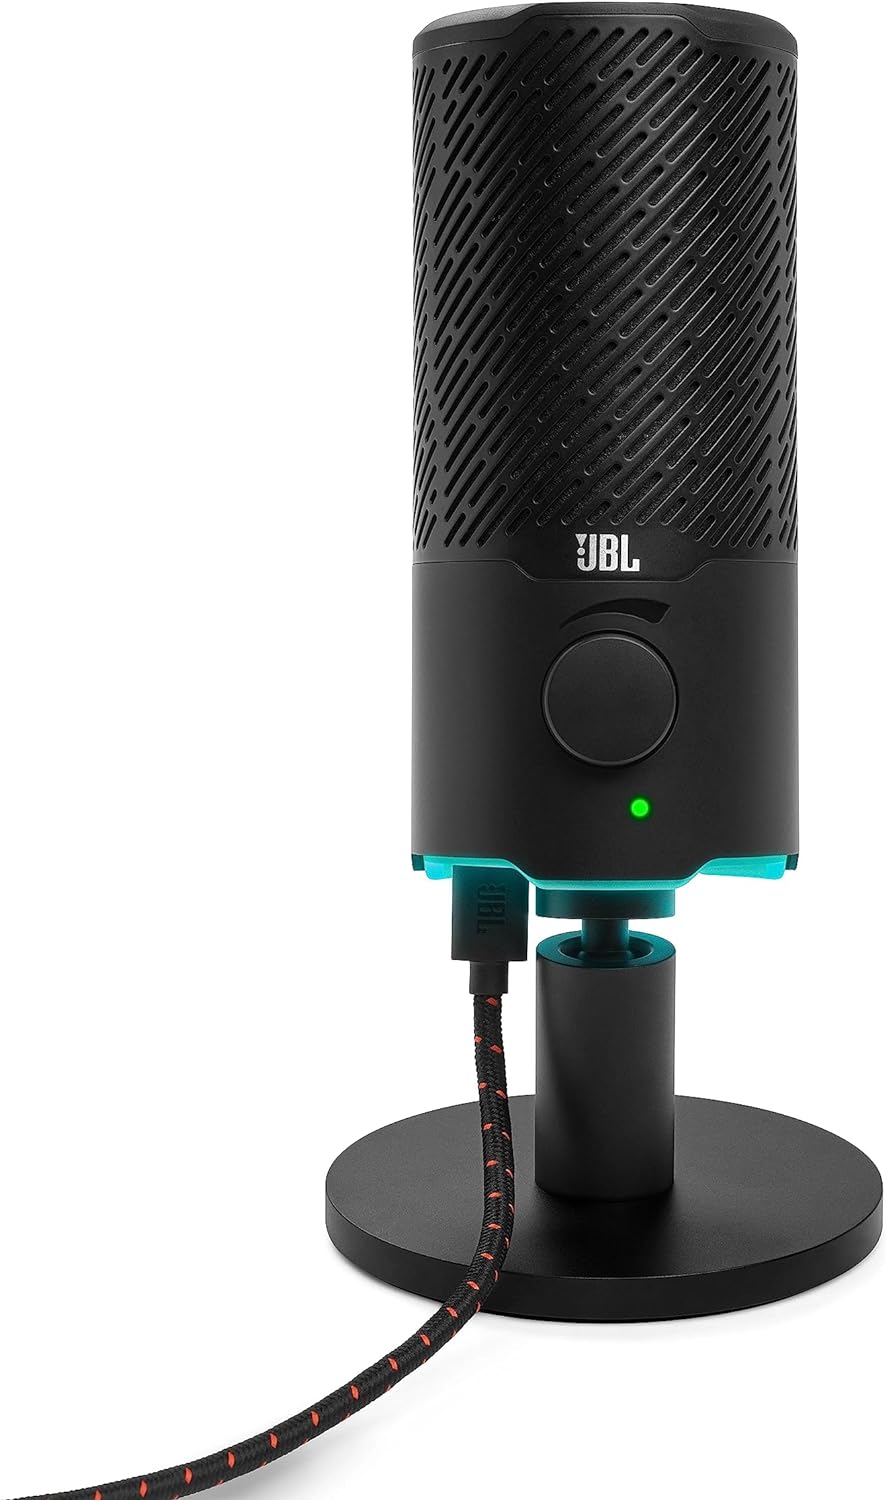 JBL Quantum Stream USB Microphone - Perfect for Streaming, Recording, and Gaming with Crystal Clear Sound Capture 6925281998218